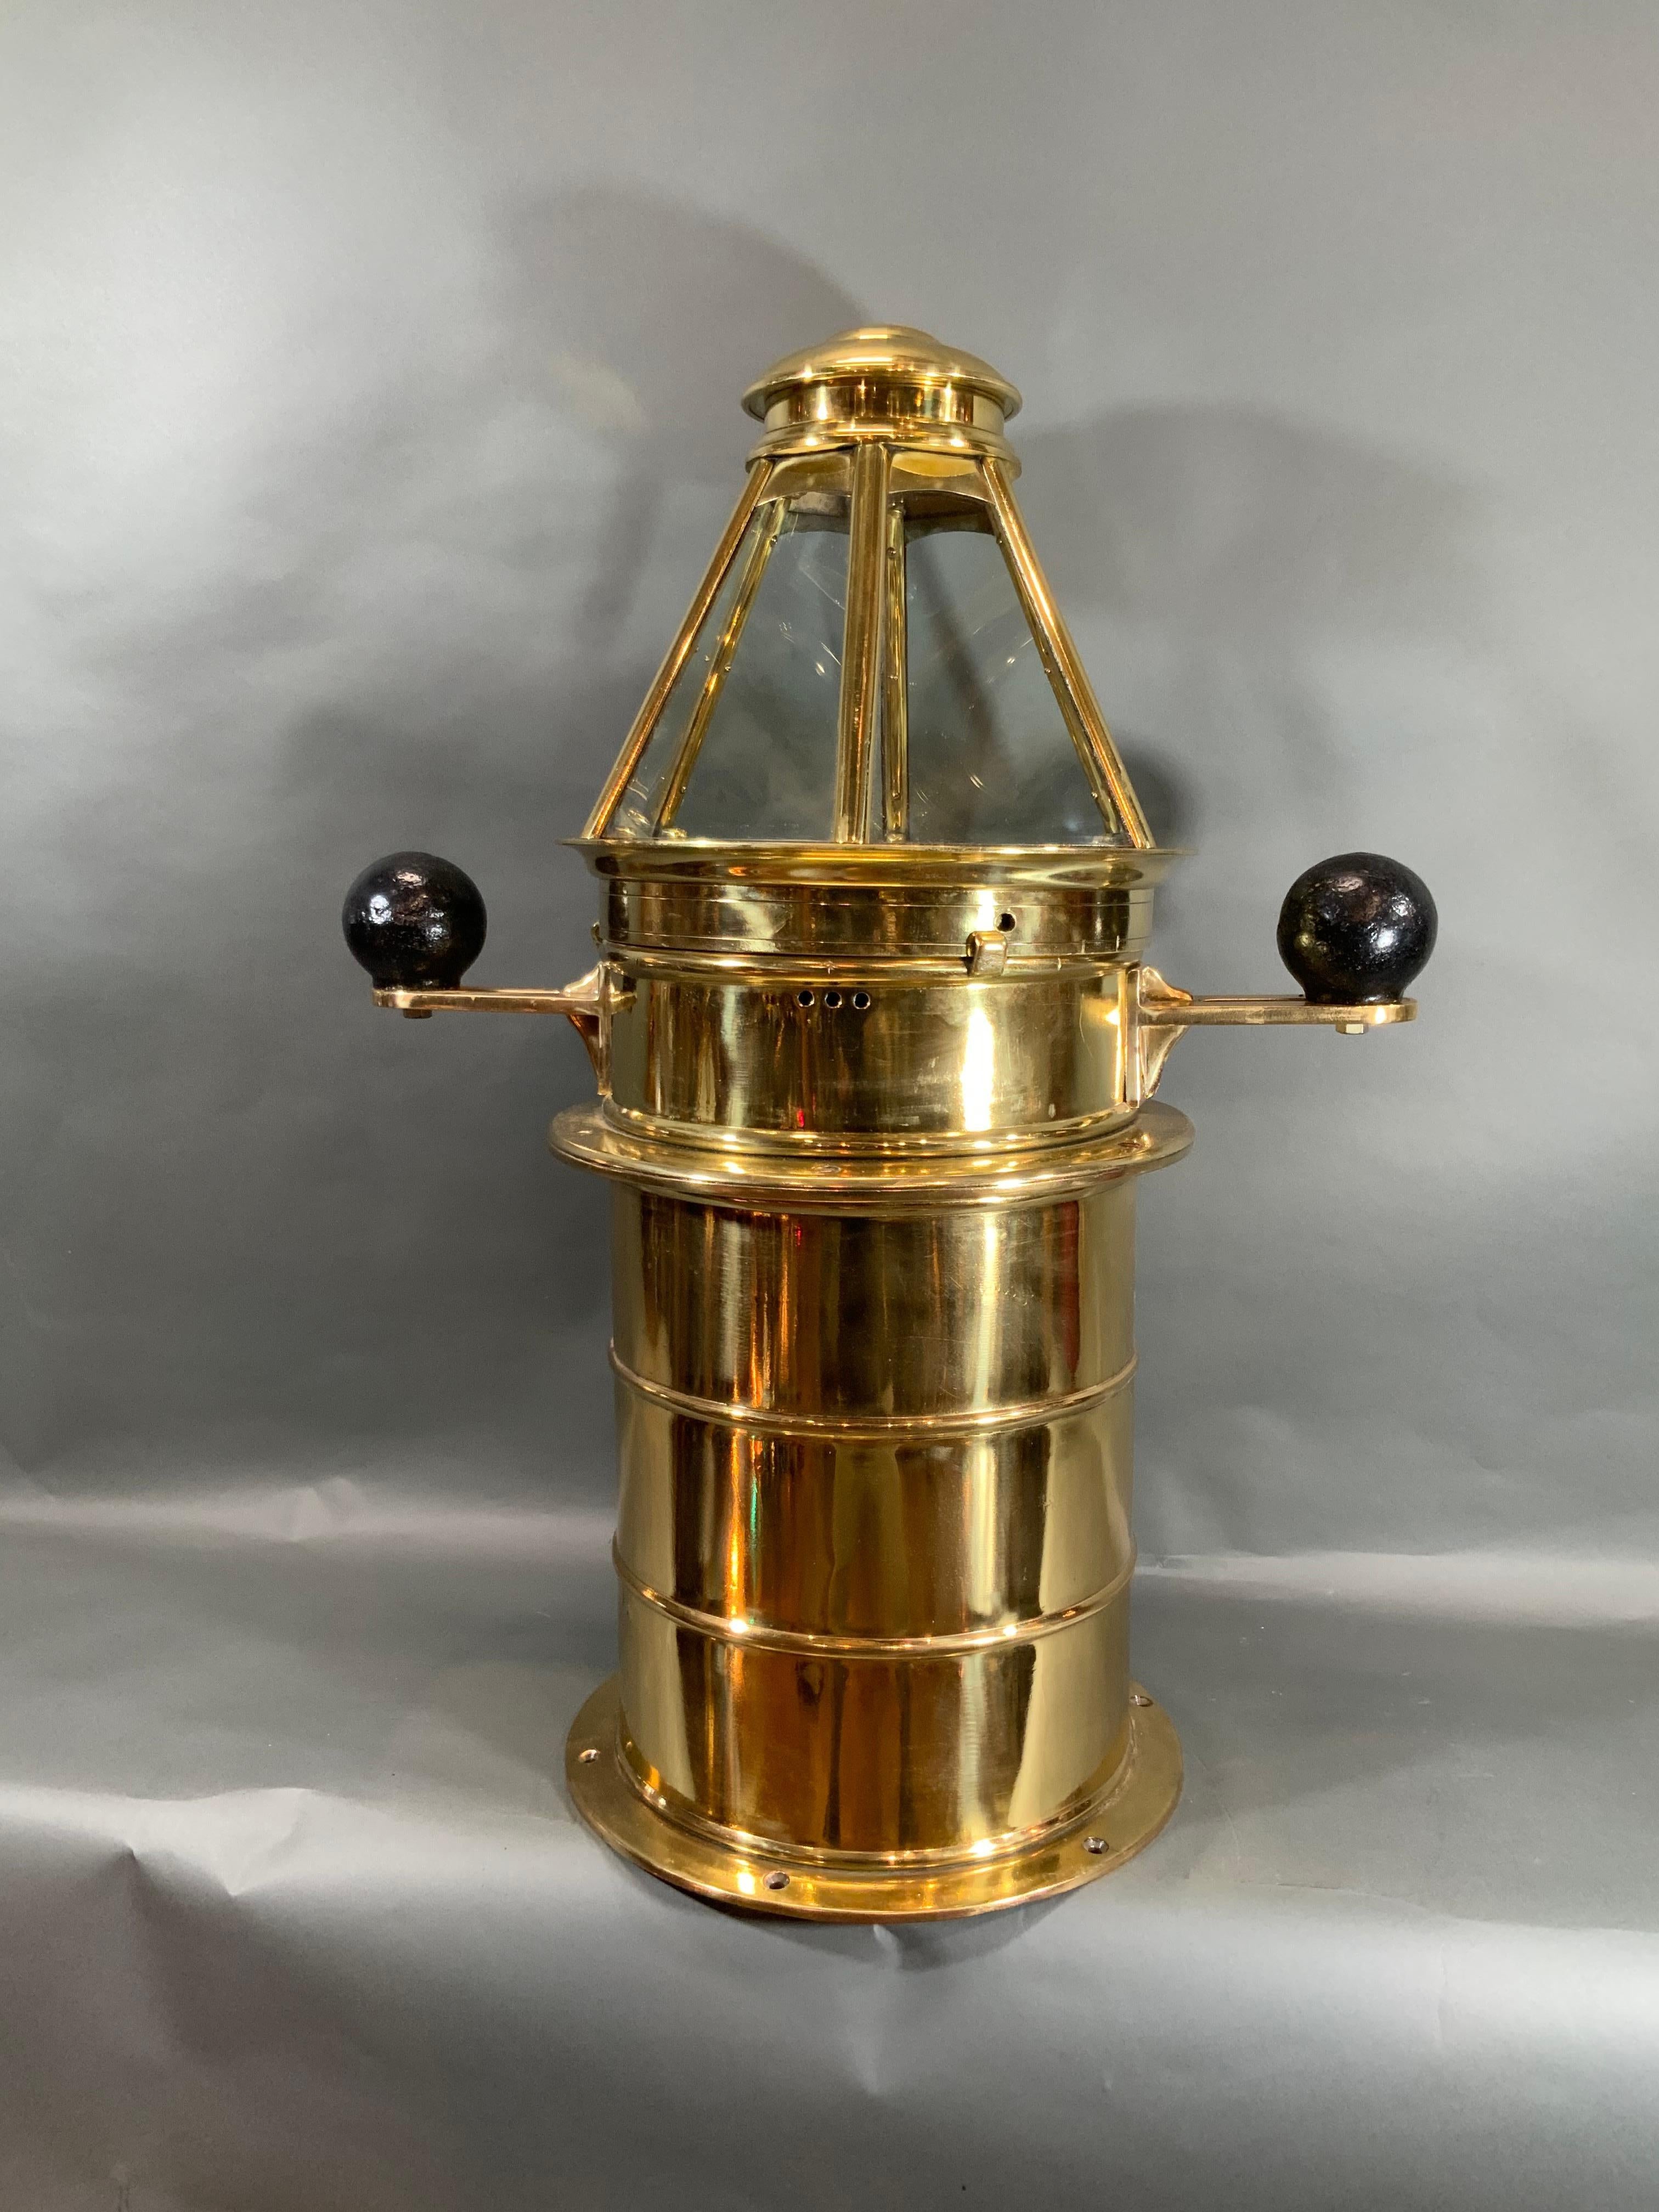 Solid brass yacht binnacle with highly polished and lacquered finish. Fitted with a compass by Ritchie of Boston. The binnacle is topped with a six sided skylight top. The base is solid brass. This is an outstanding relic. Iron compensating balls